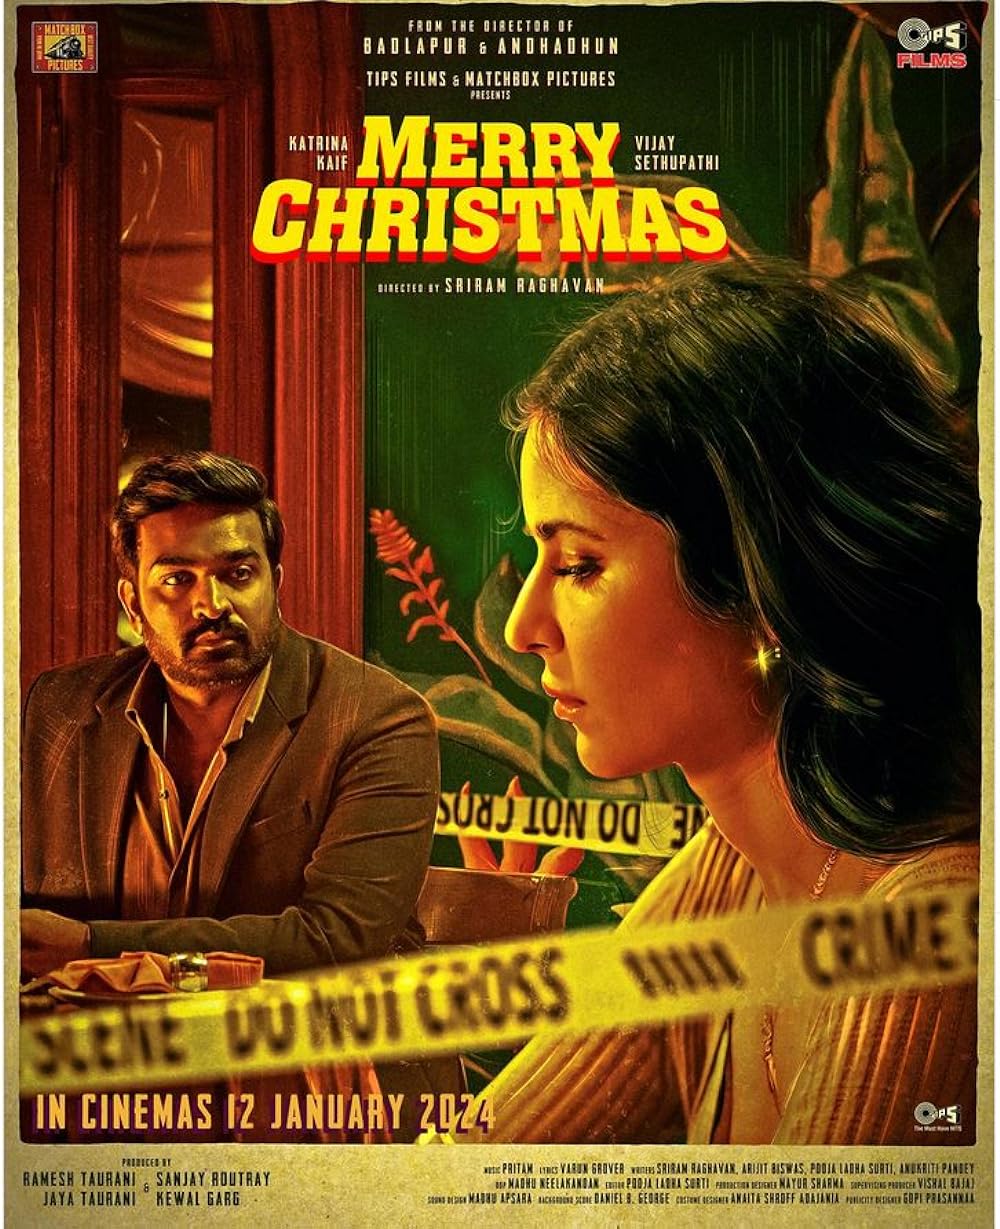 Merry ChristmasDirected by Sriram Raghavan, 'Merry Christmas' promises a romantic thriller exploring a man's life-changing encounter on Christmas Eve when he falls for a girl, setting the stage for intriguing twists and turns.